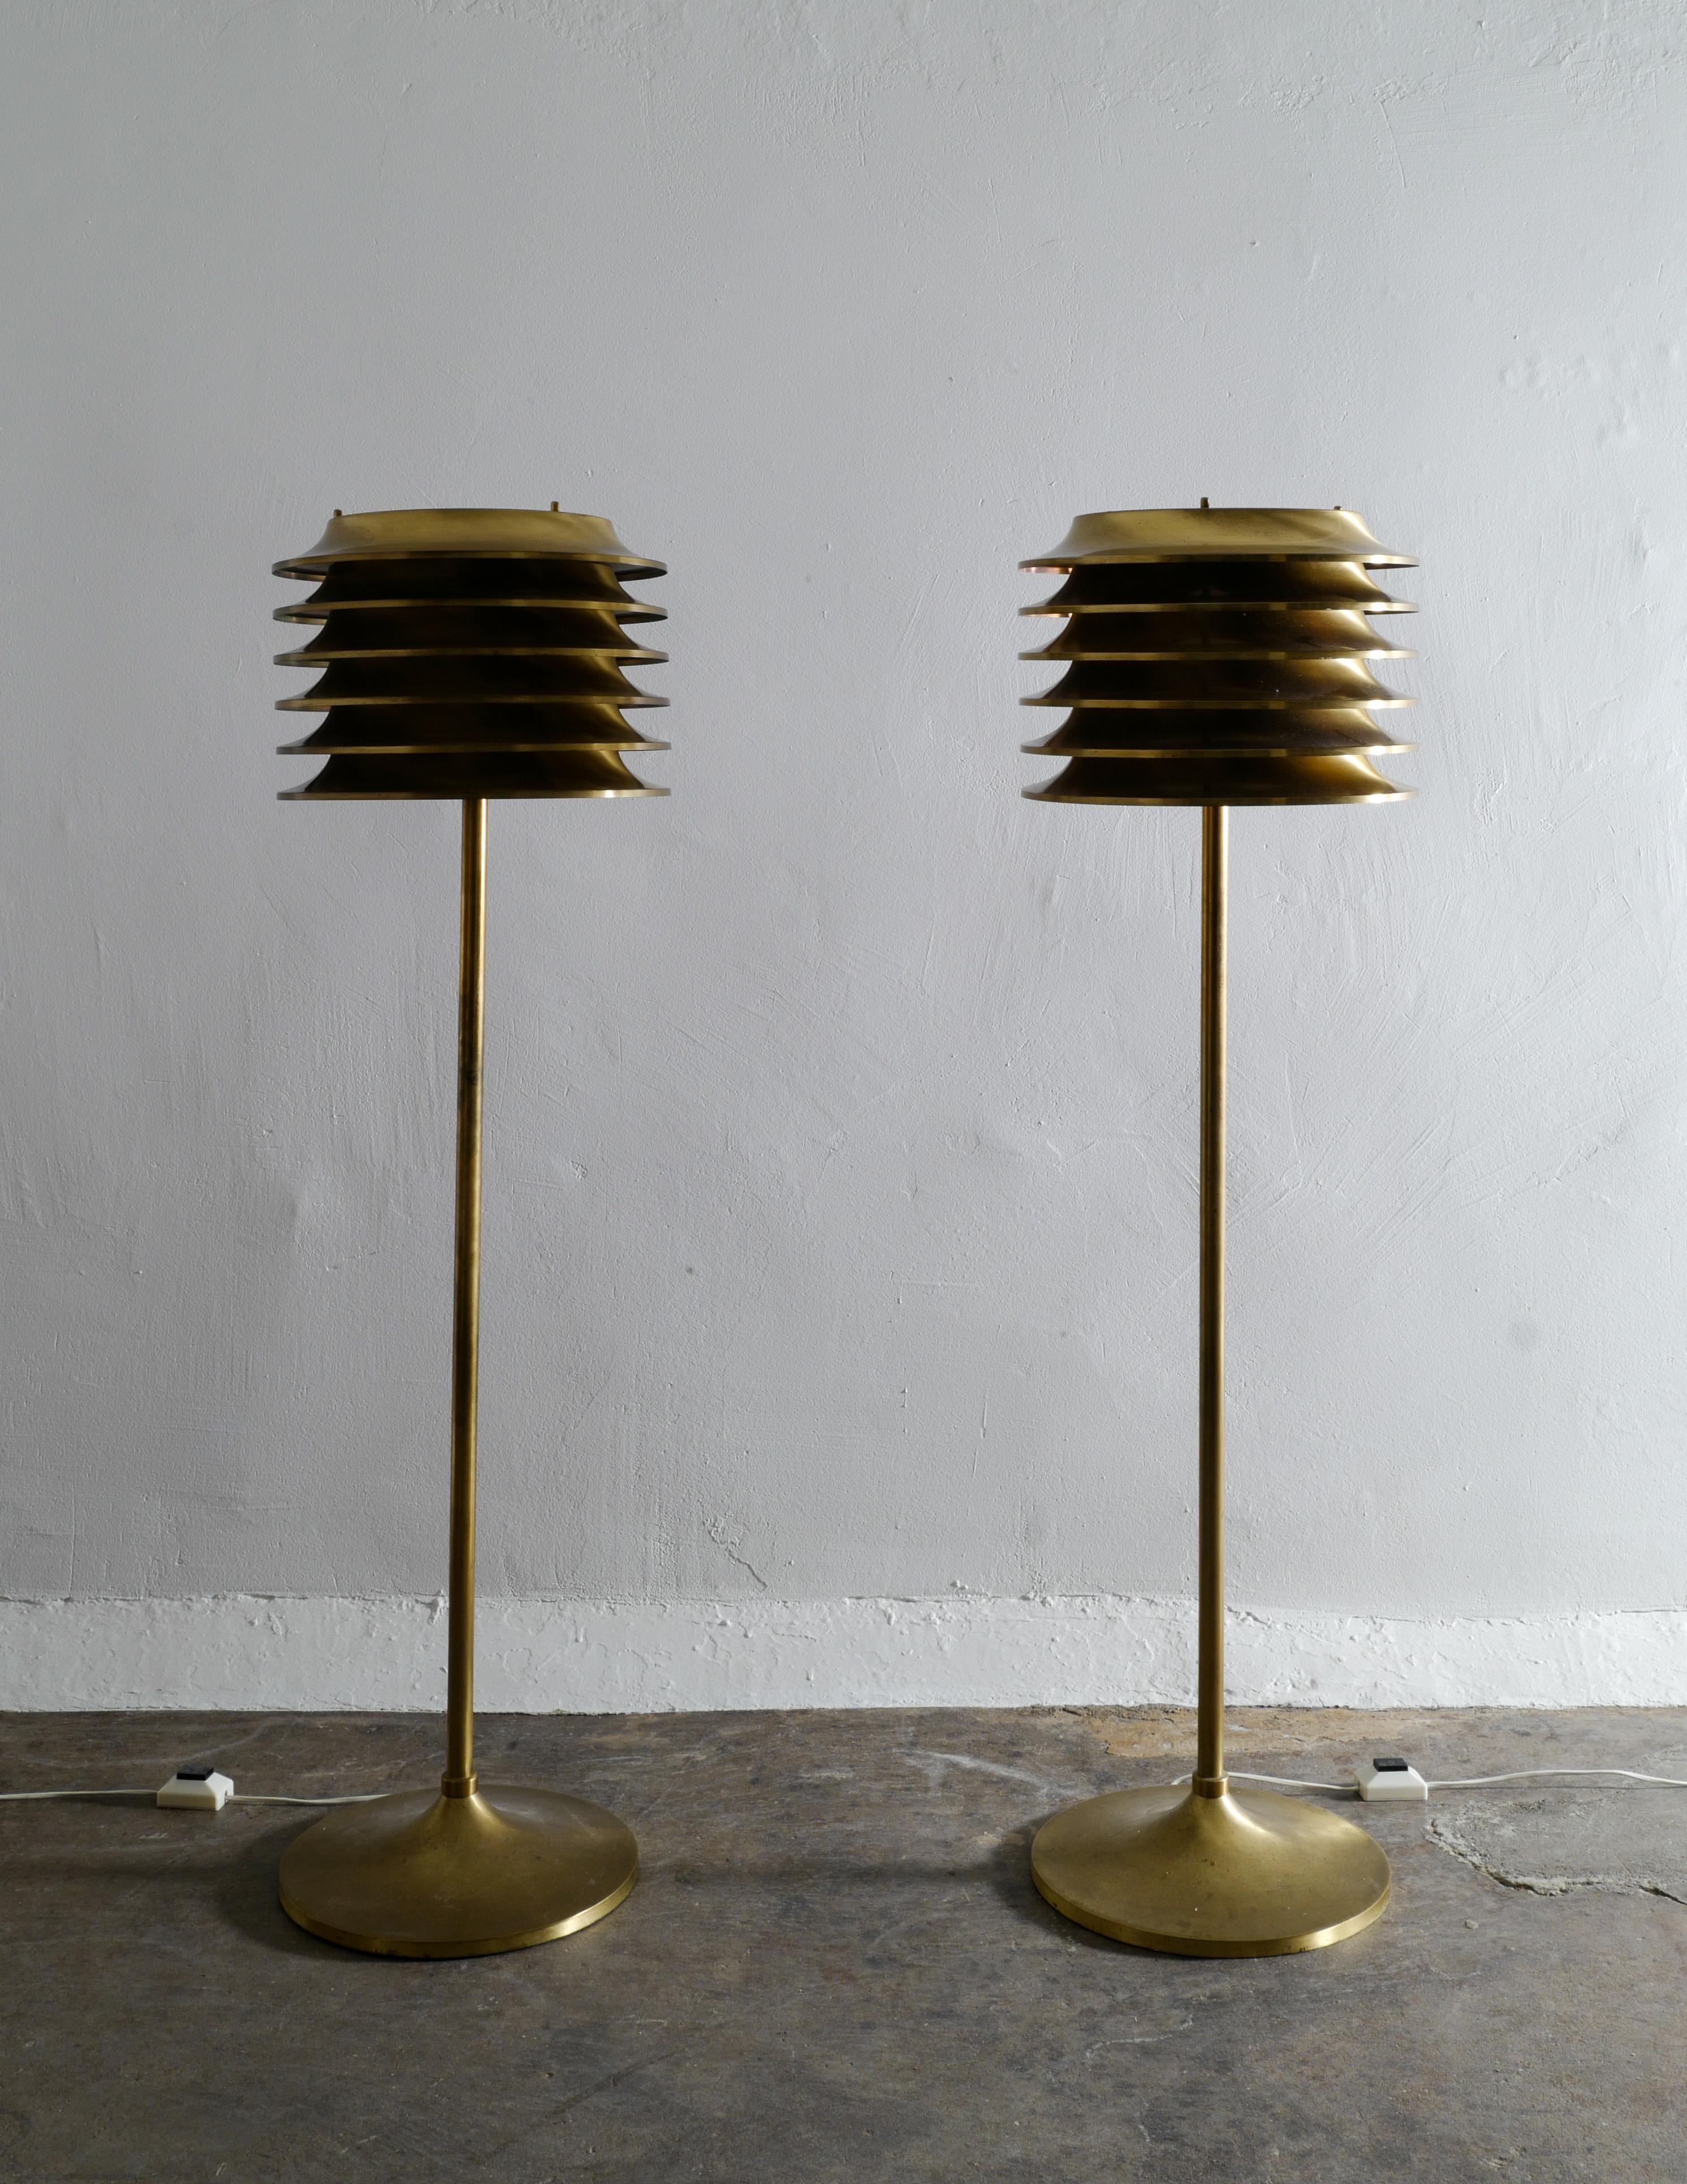 Very rare pair of floor lamps in brass designed by Kai Ruokonen in 1970s and produced by Orno Oy, Finland. The pair is in great and original condition with some signs of use and patina. Both are signed and working.